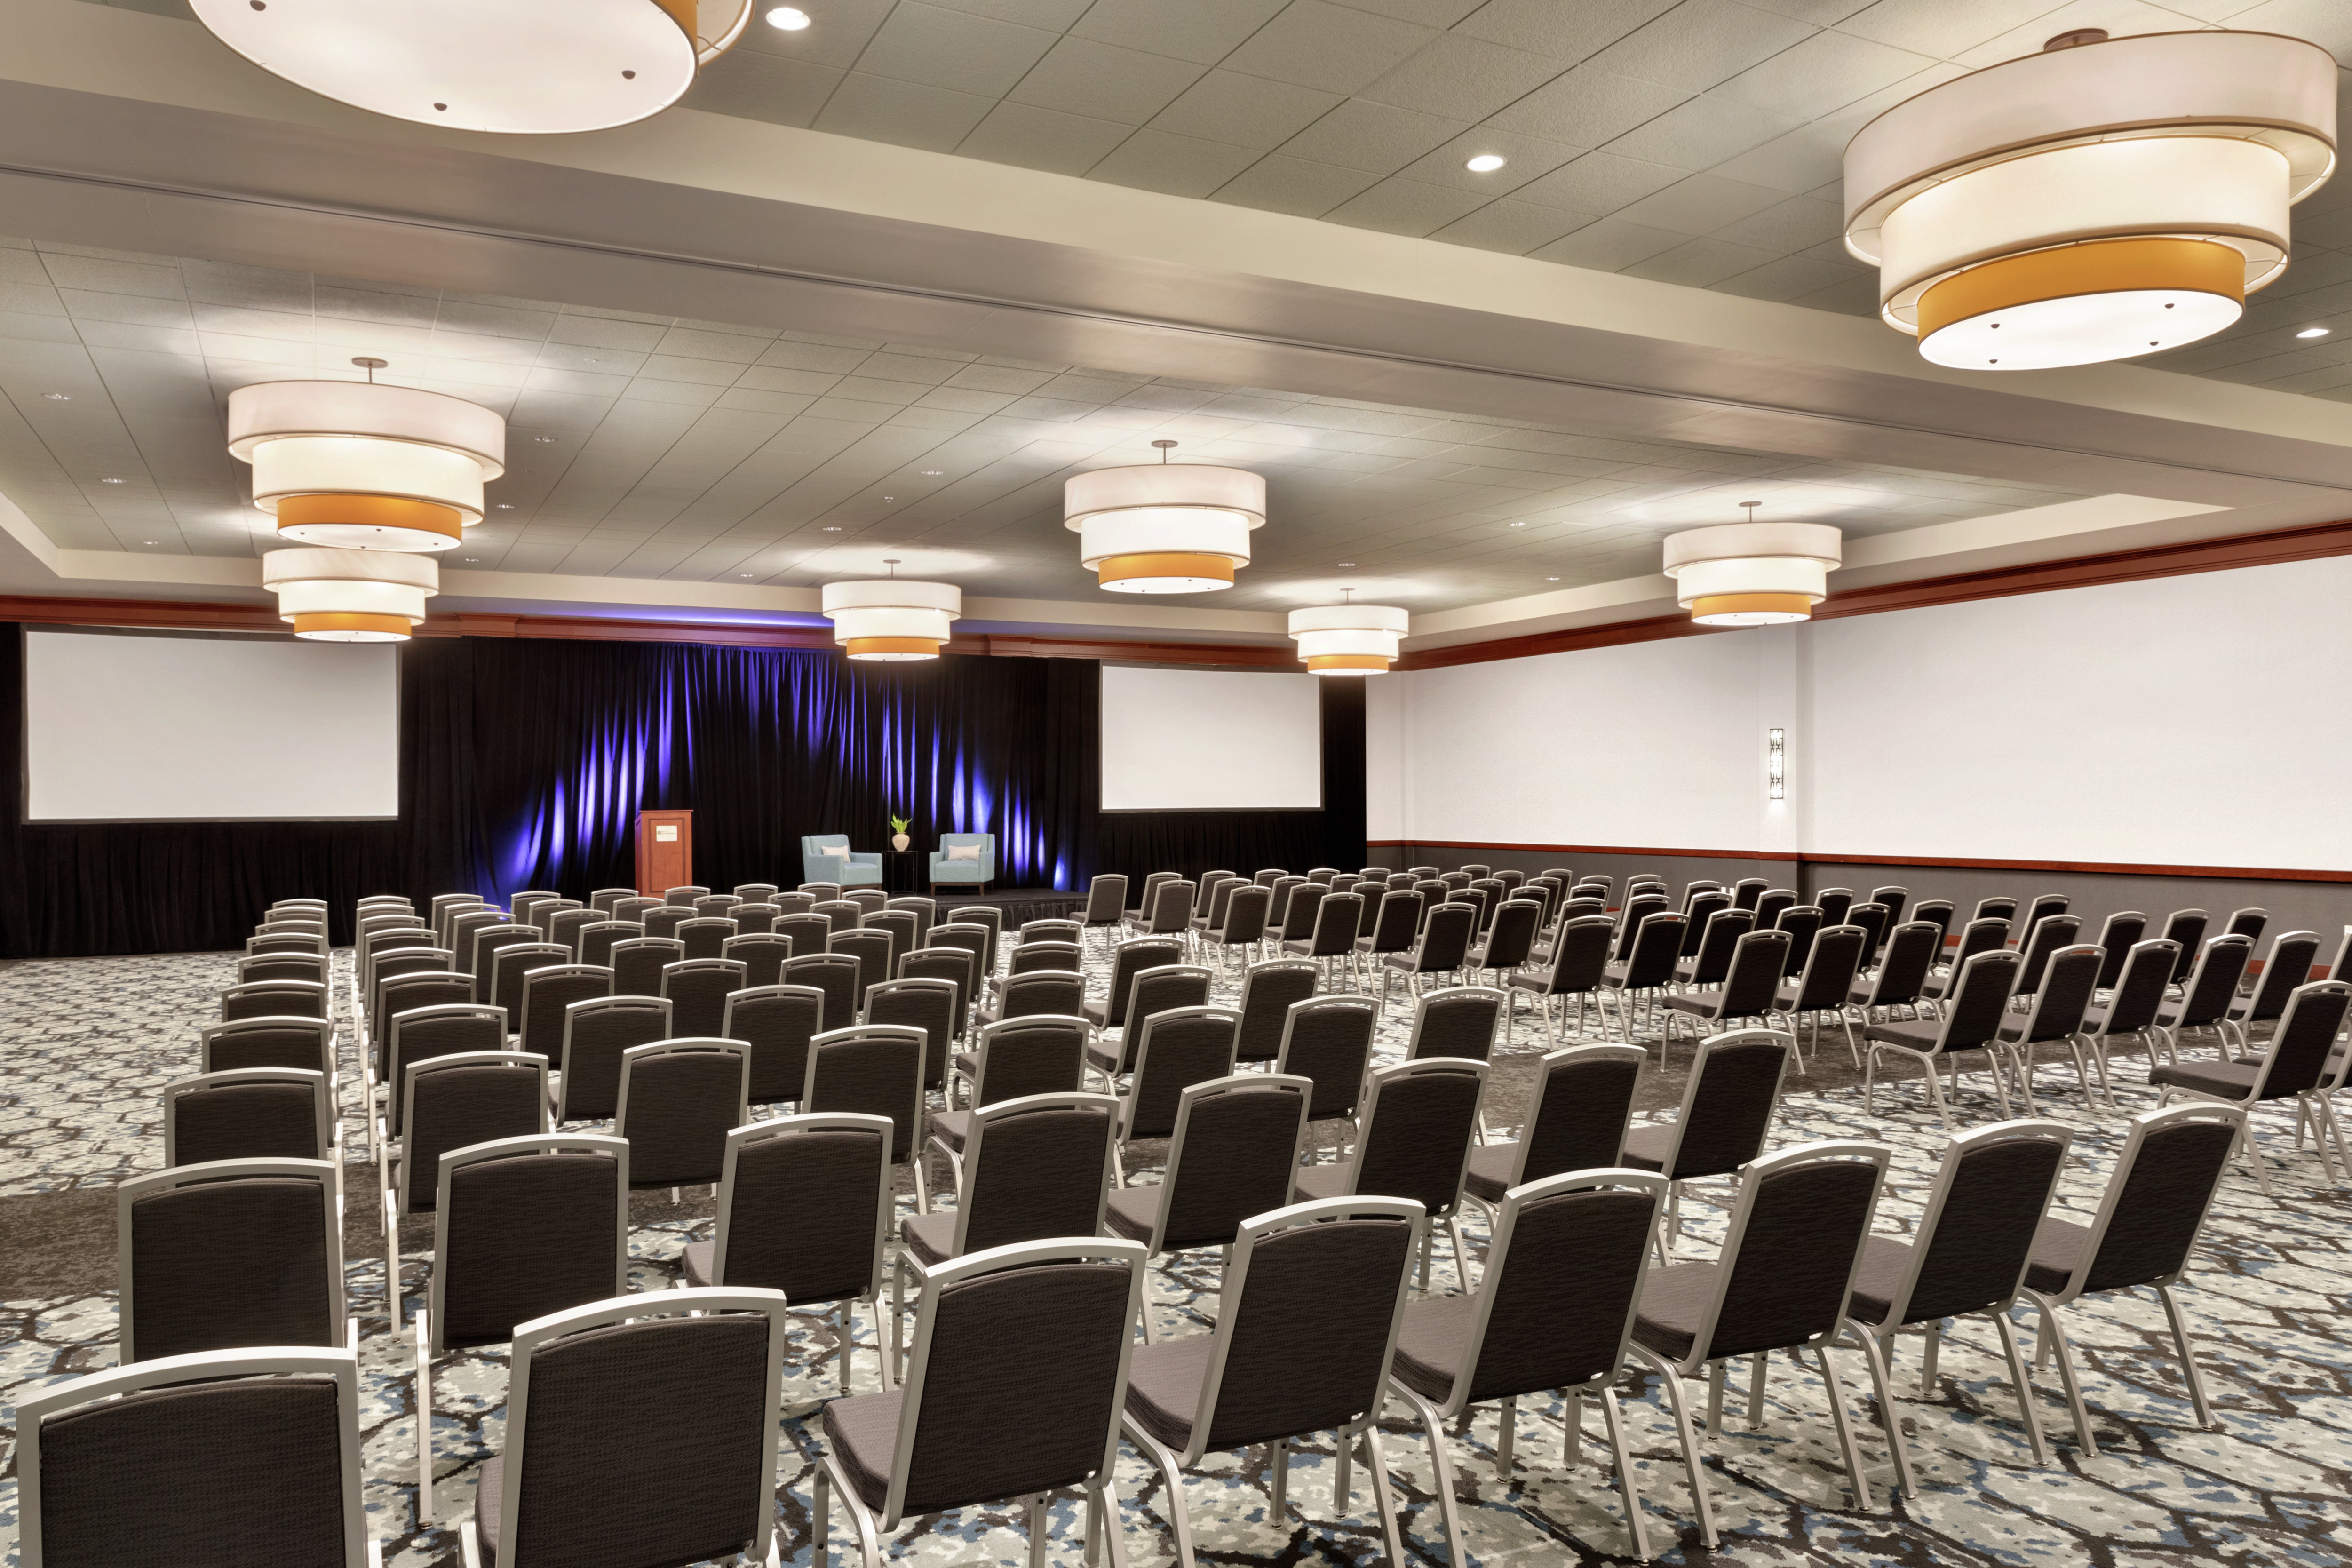 Spacious hotel ballroom featuring theater setup and stage with podium at front of room.